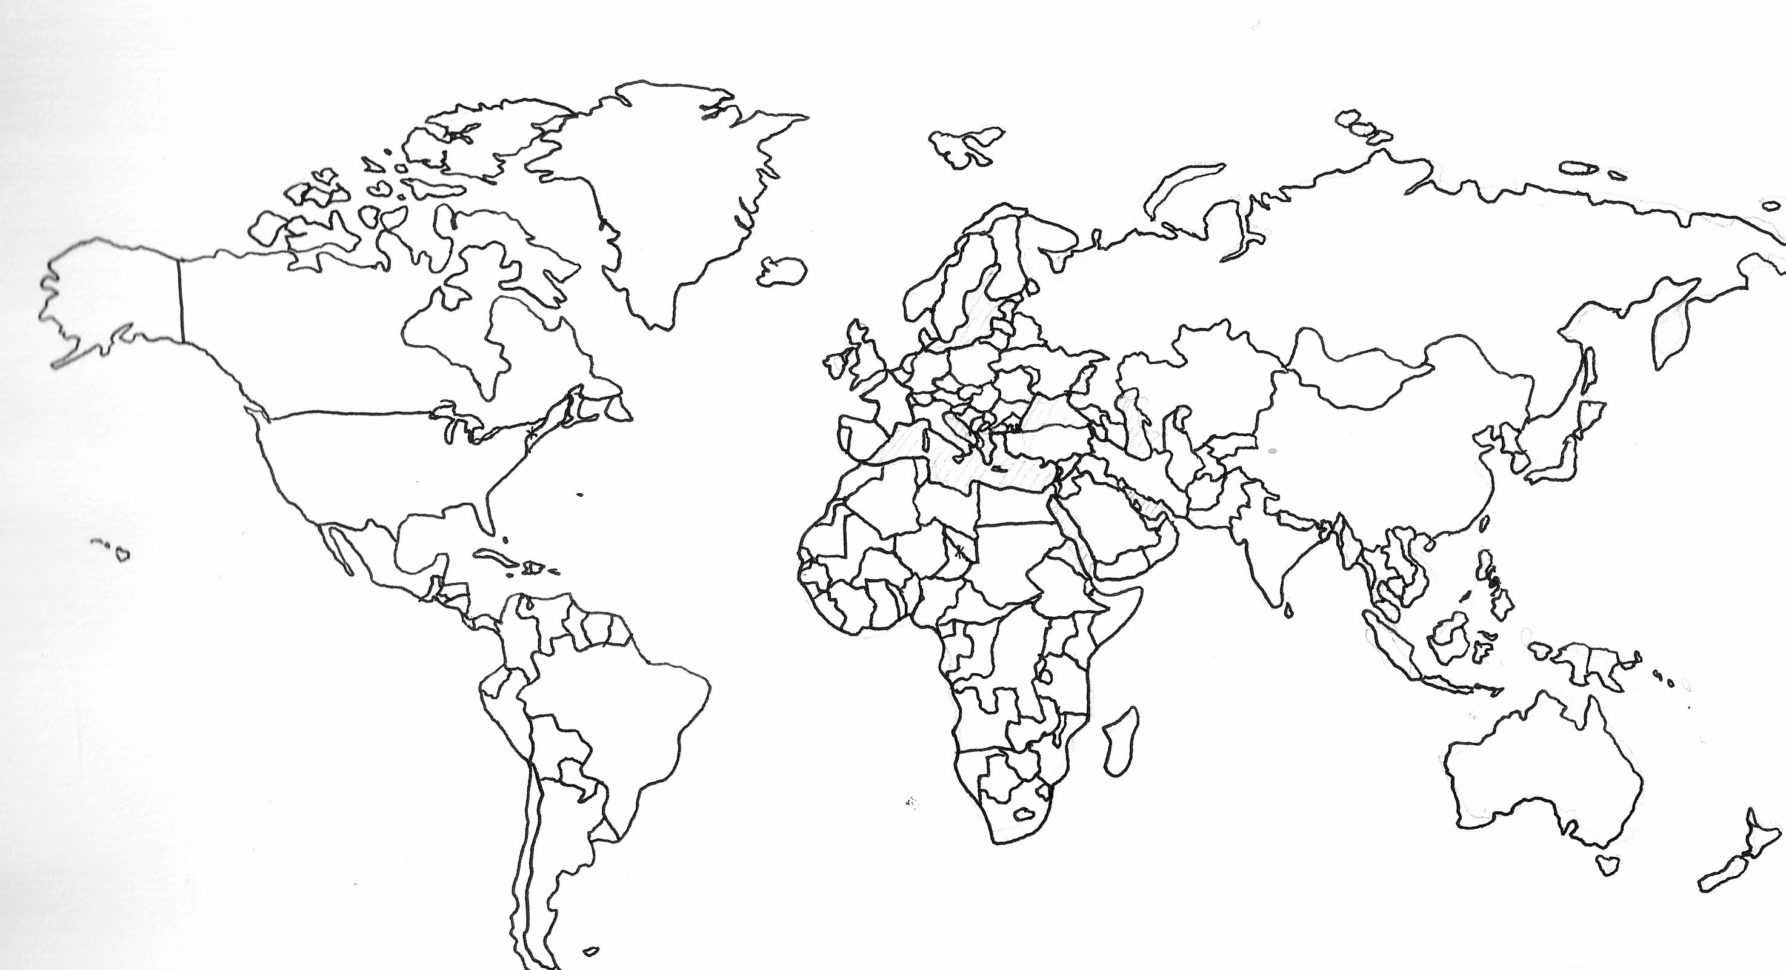 World Map Fill In The Blank Worksheet 2022 Us Map Printable Blank 2672